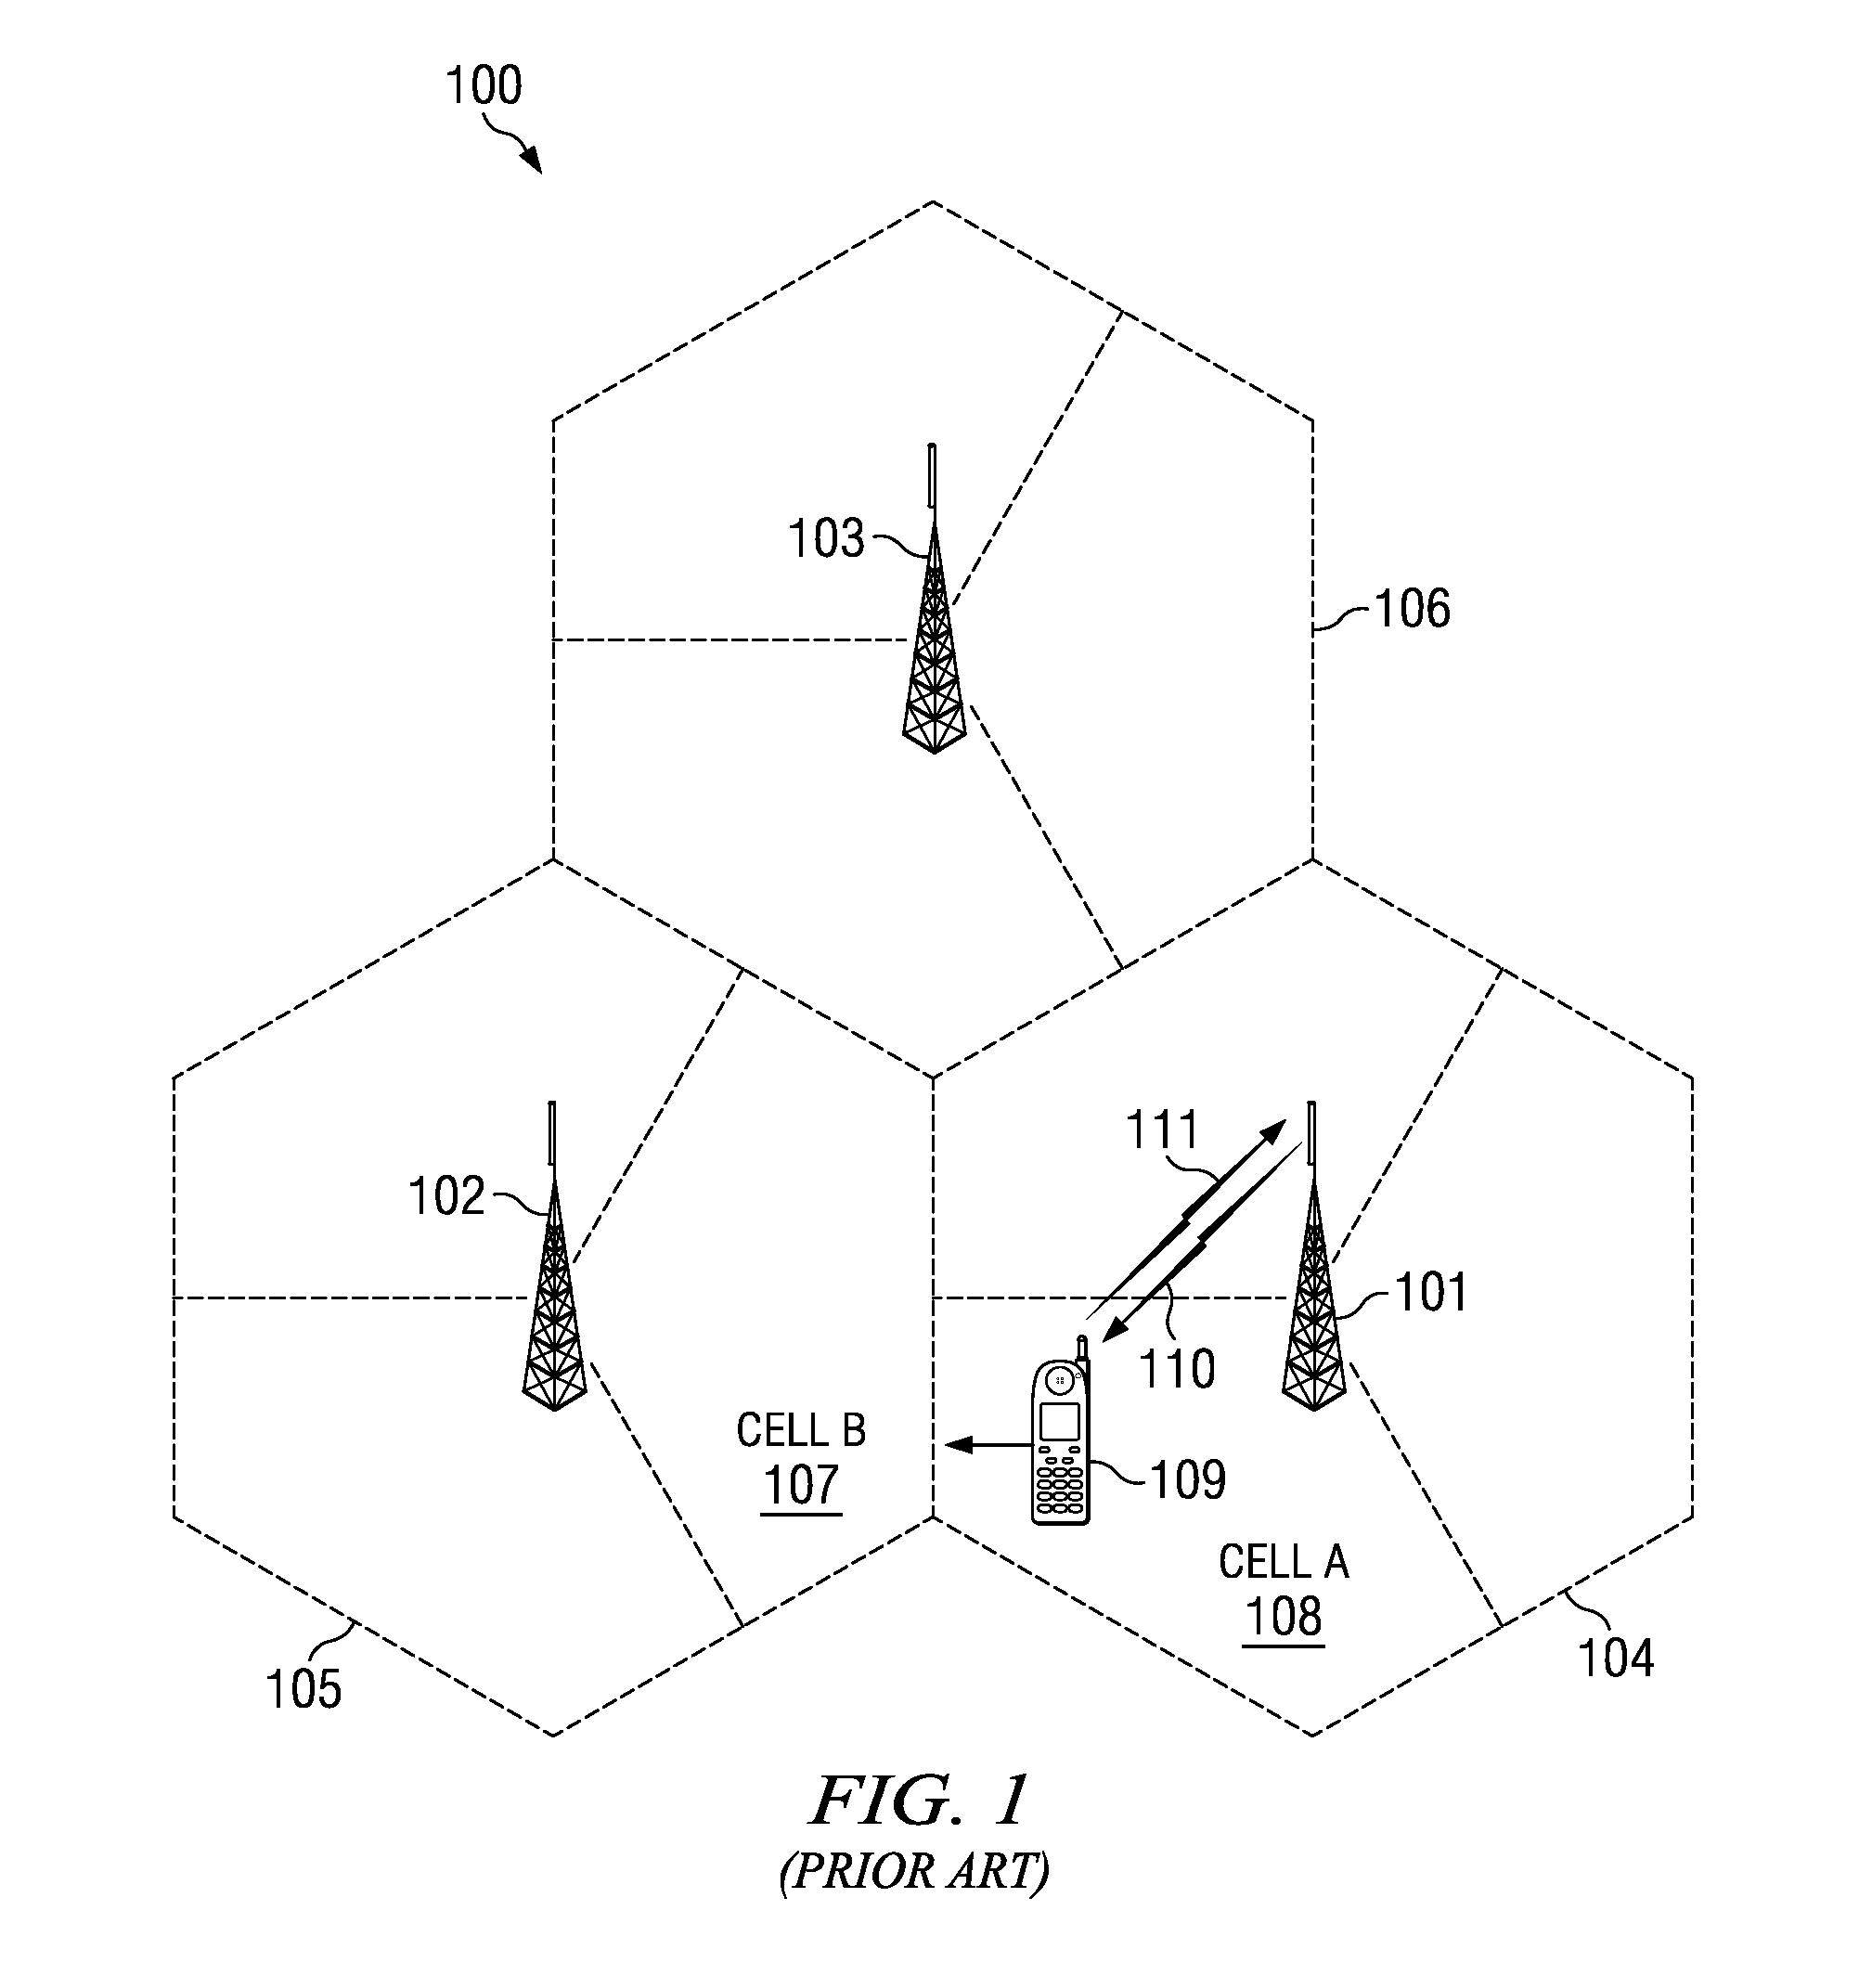 Hybrid automatic repeat request acknowledge resource allocation for enhanced physical downlink control channel